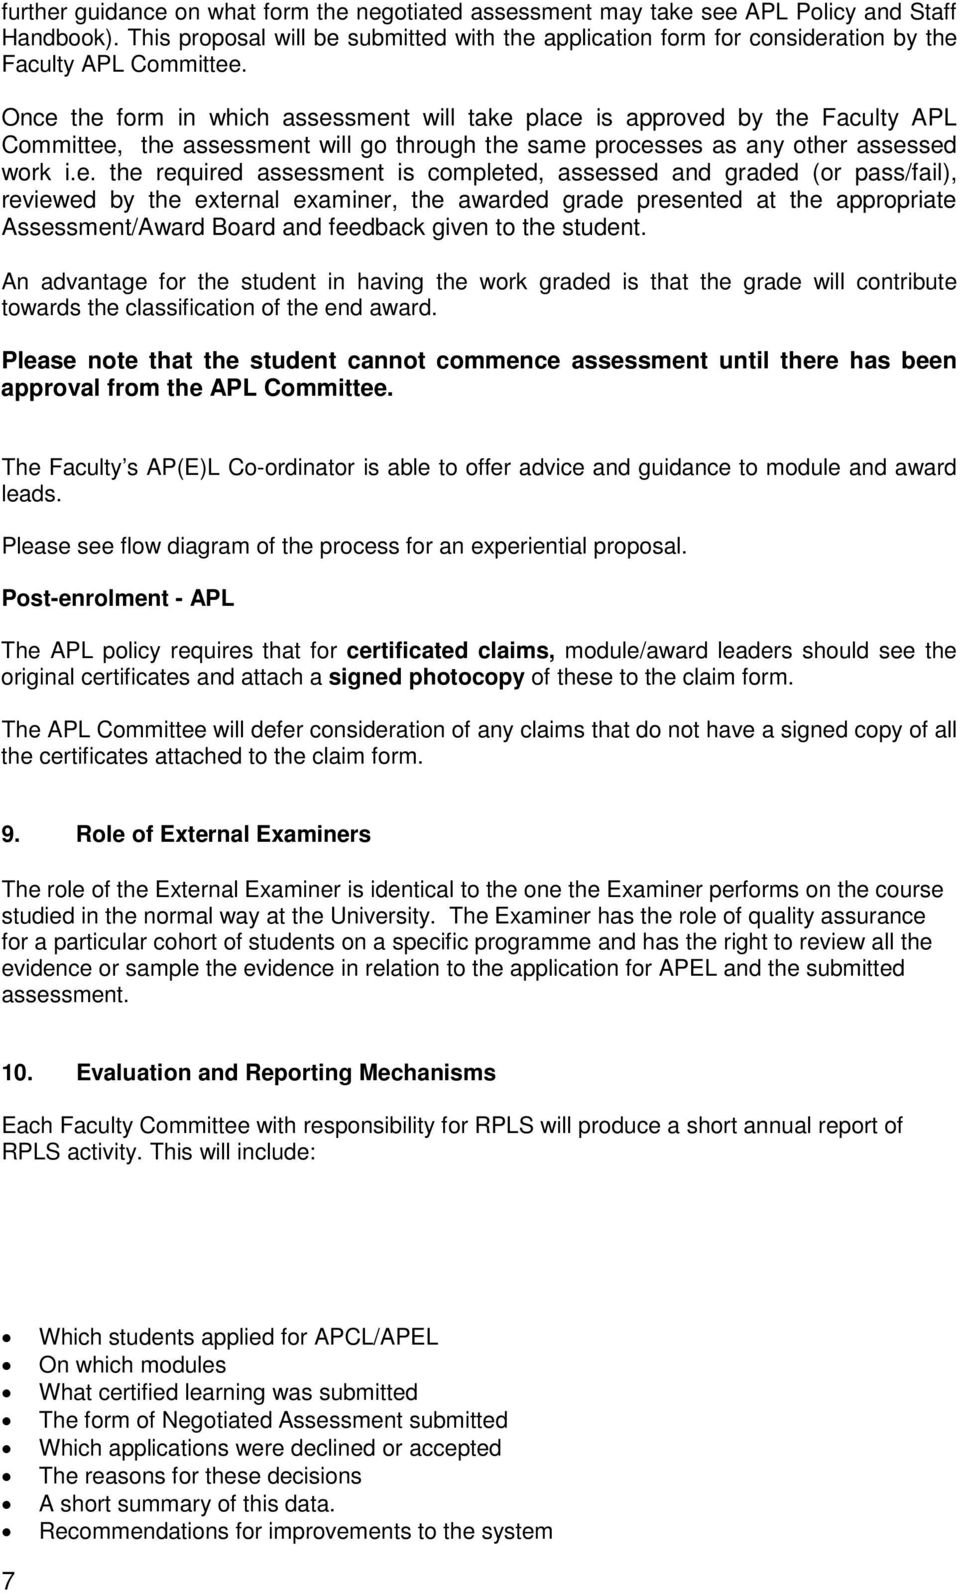 Once the form in which assessment will take place is approved by the Faculty APL Committee, the assessment will go through the same processes as any other assessed work i.e. the required assessment